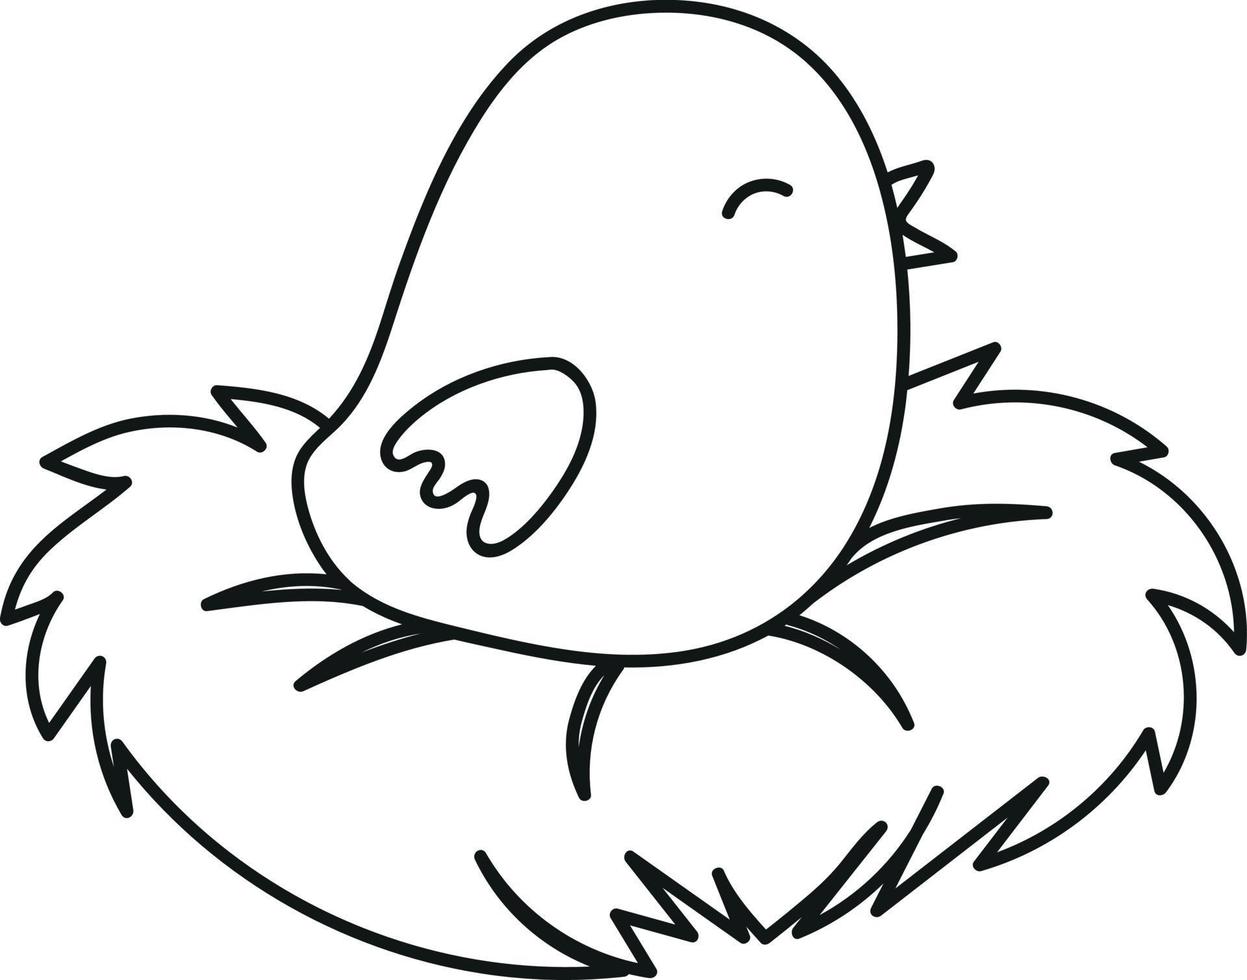 Chick in the Nest Doodle Style vector